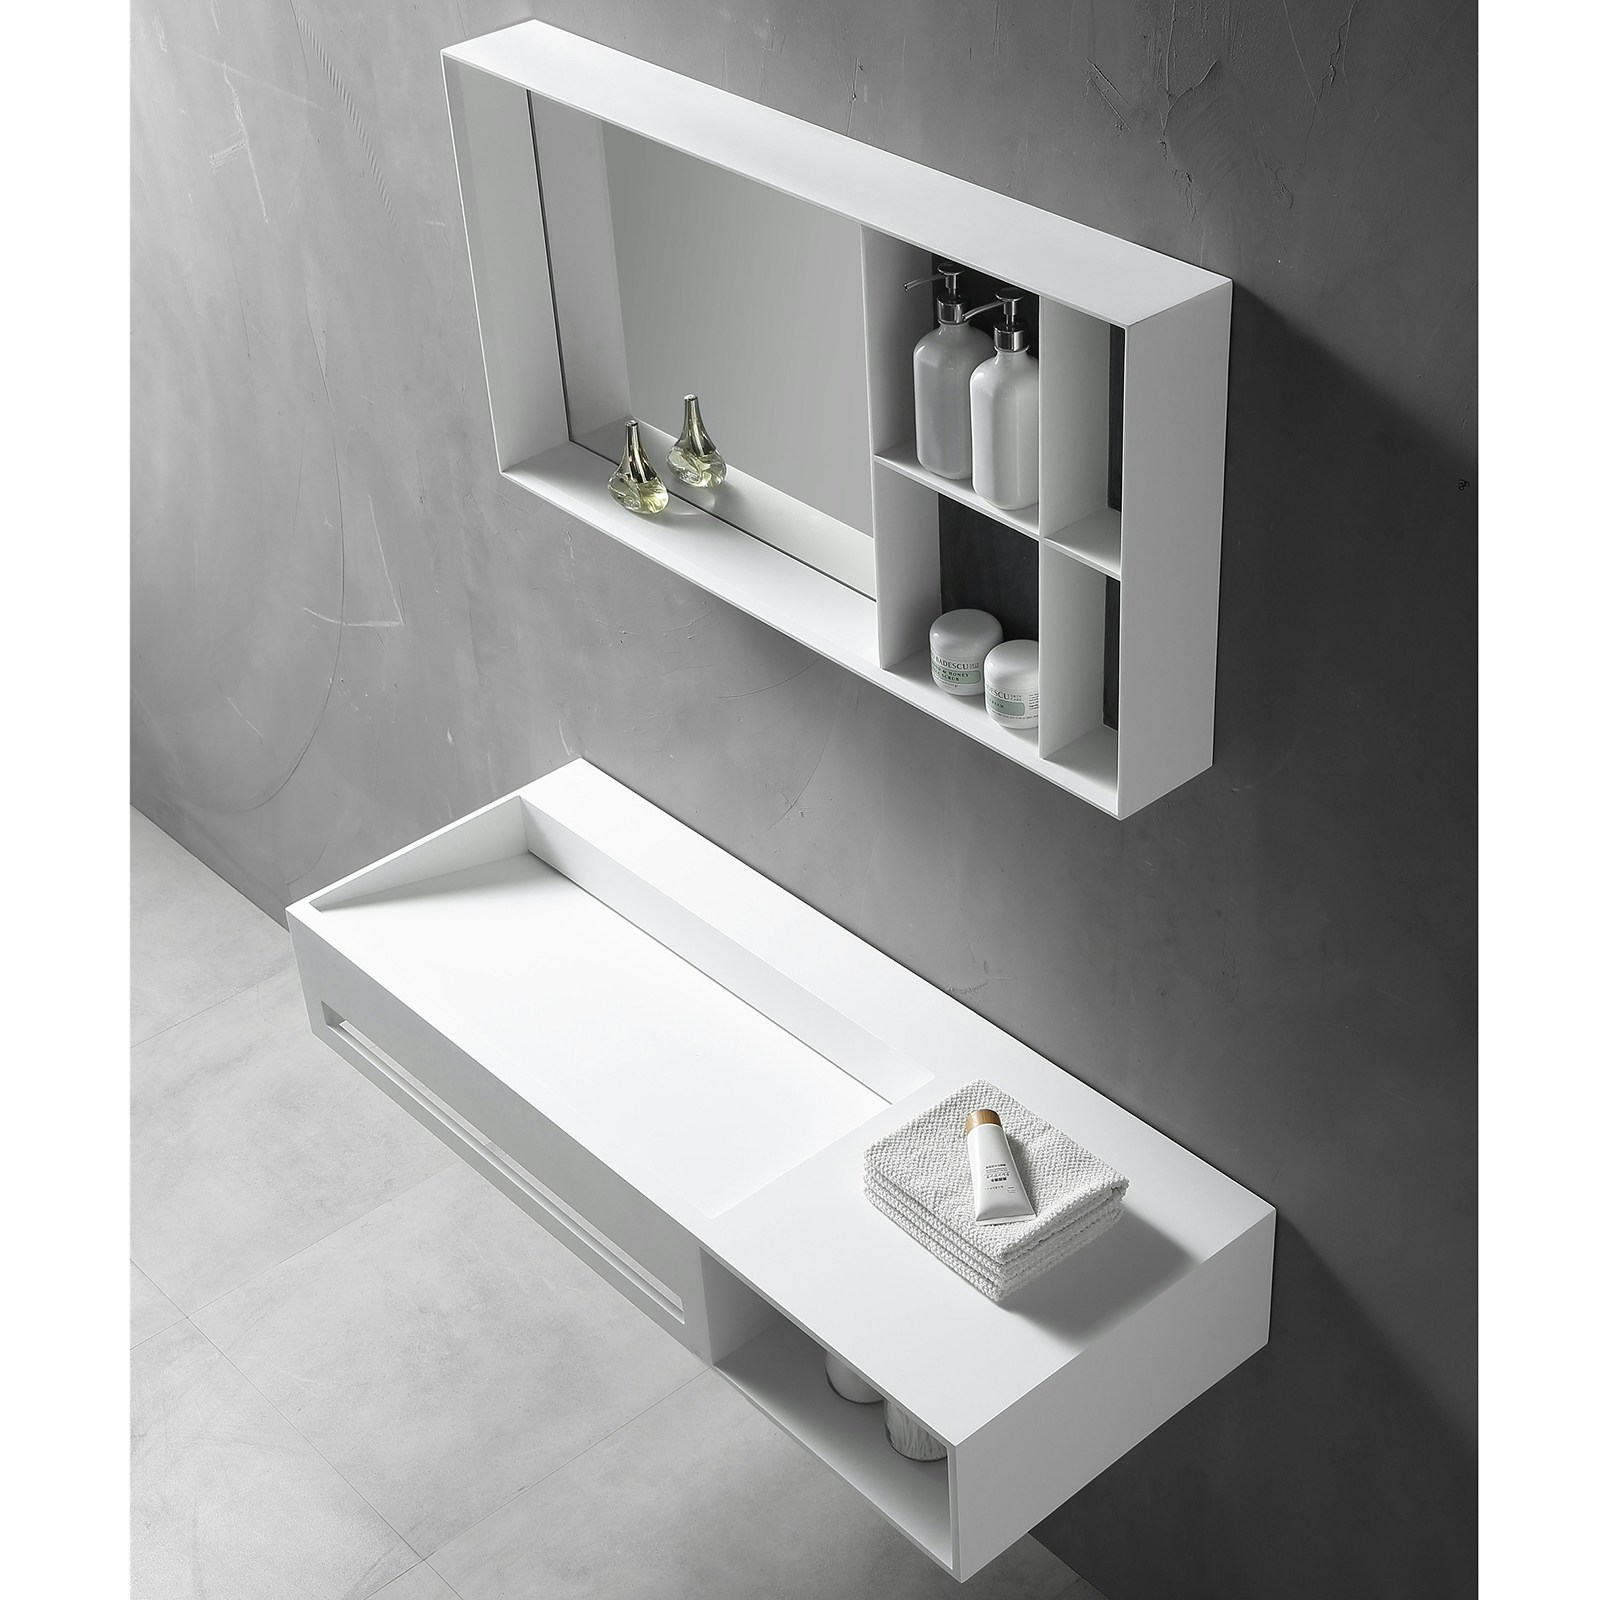 Wall Mounted Bathroom Basin Twg62 Of Solid Surface With Storage Space And Towel Rack Width Selectable